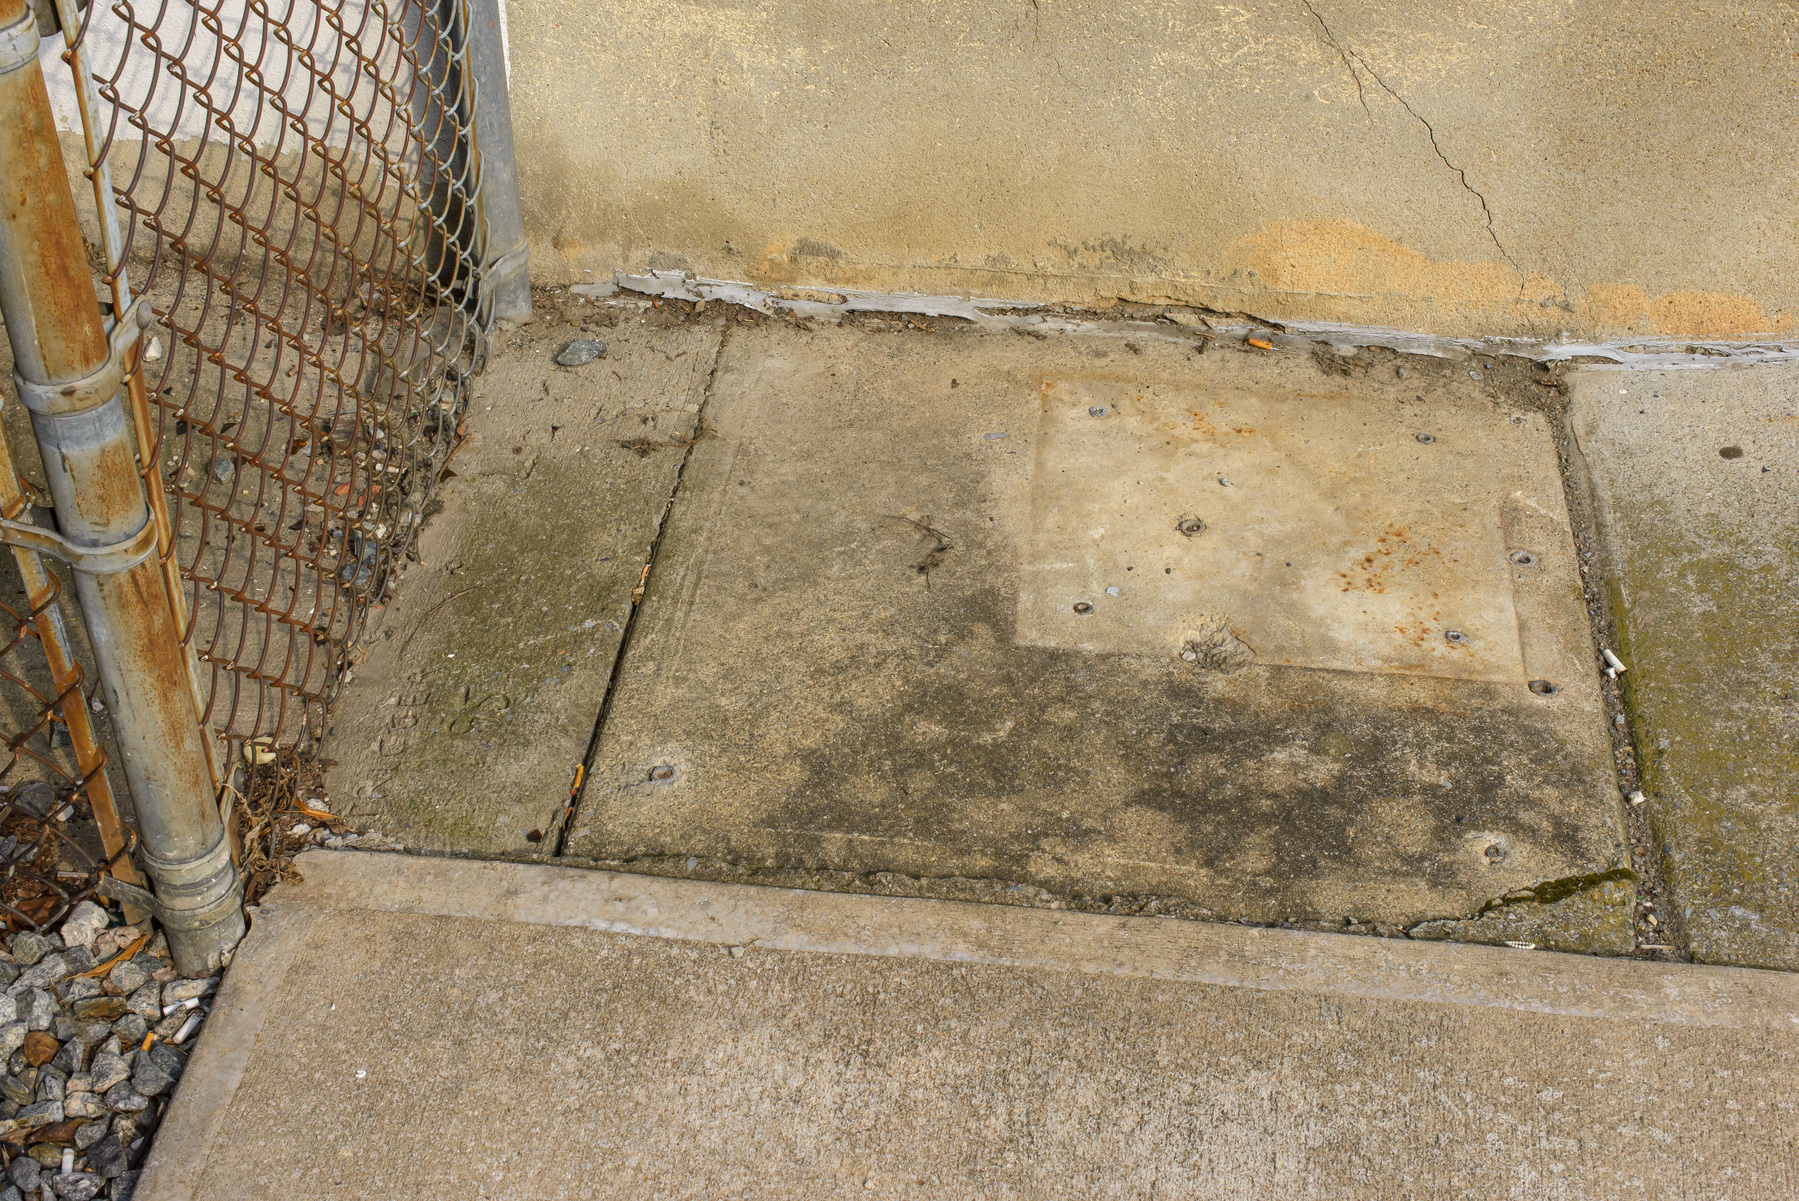 close up of rectangular concrete sidewalk surface with square patch where a pedestal used to be, chain link fence on the lefthand edge of the frame